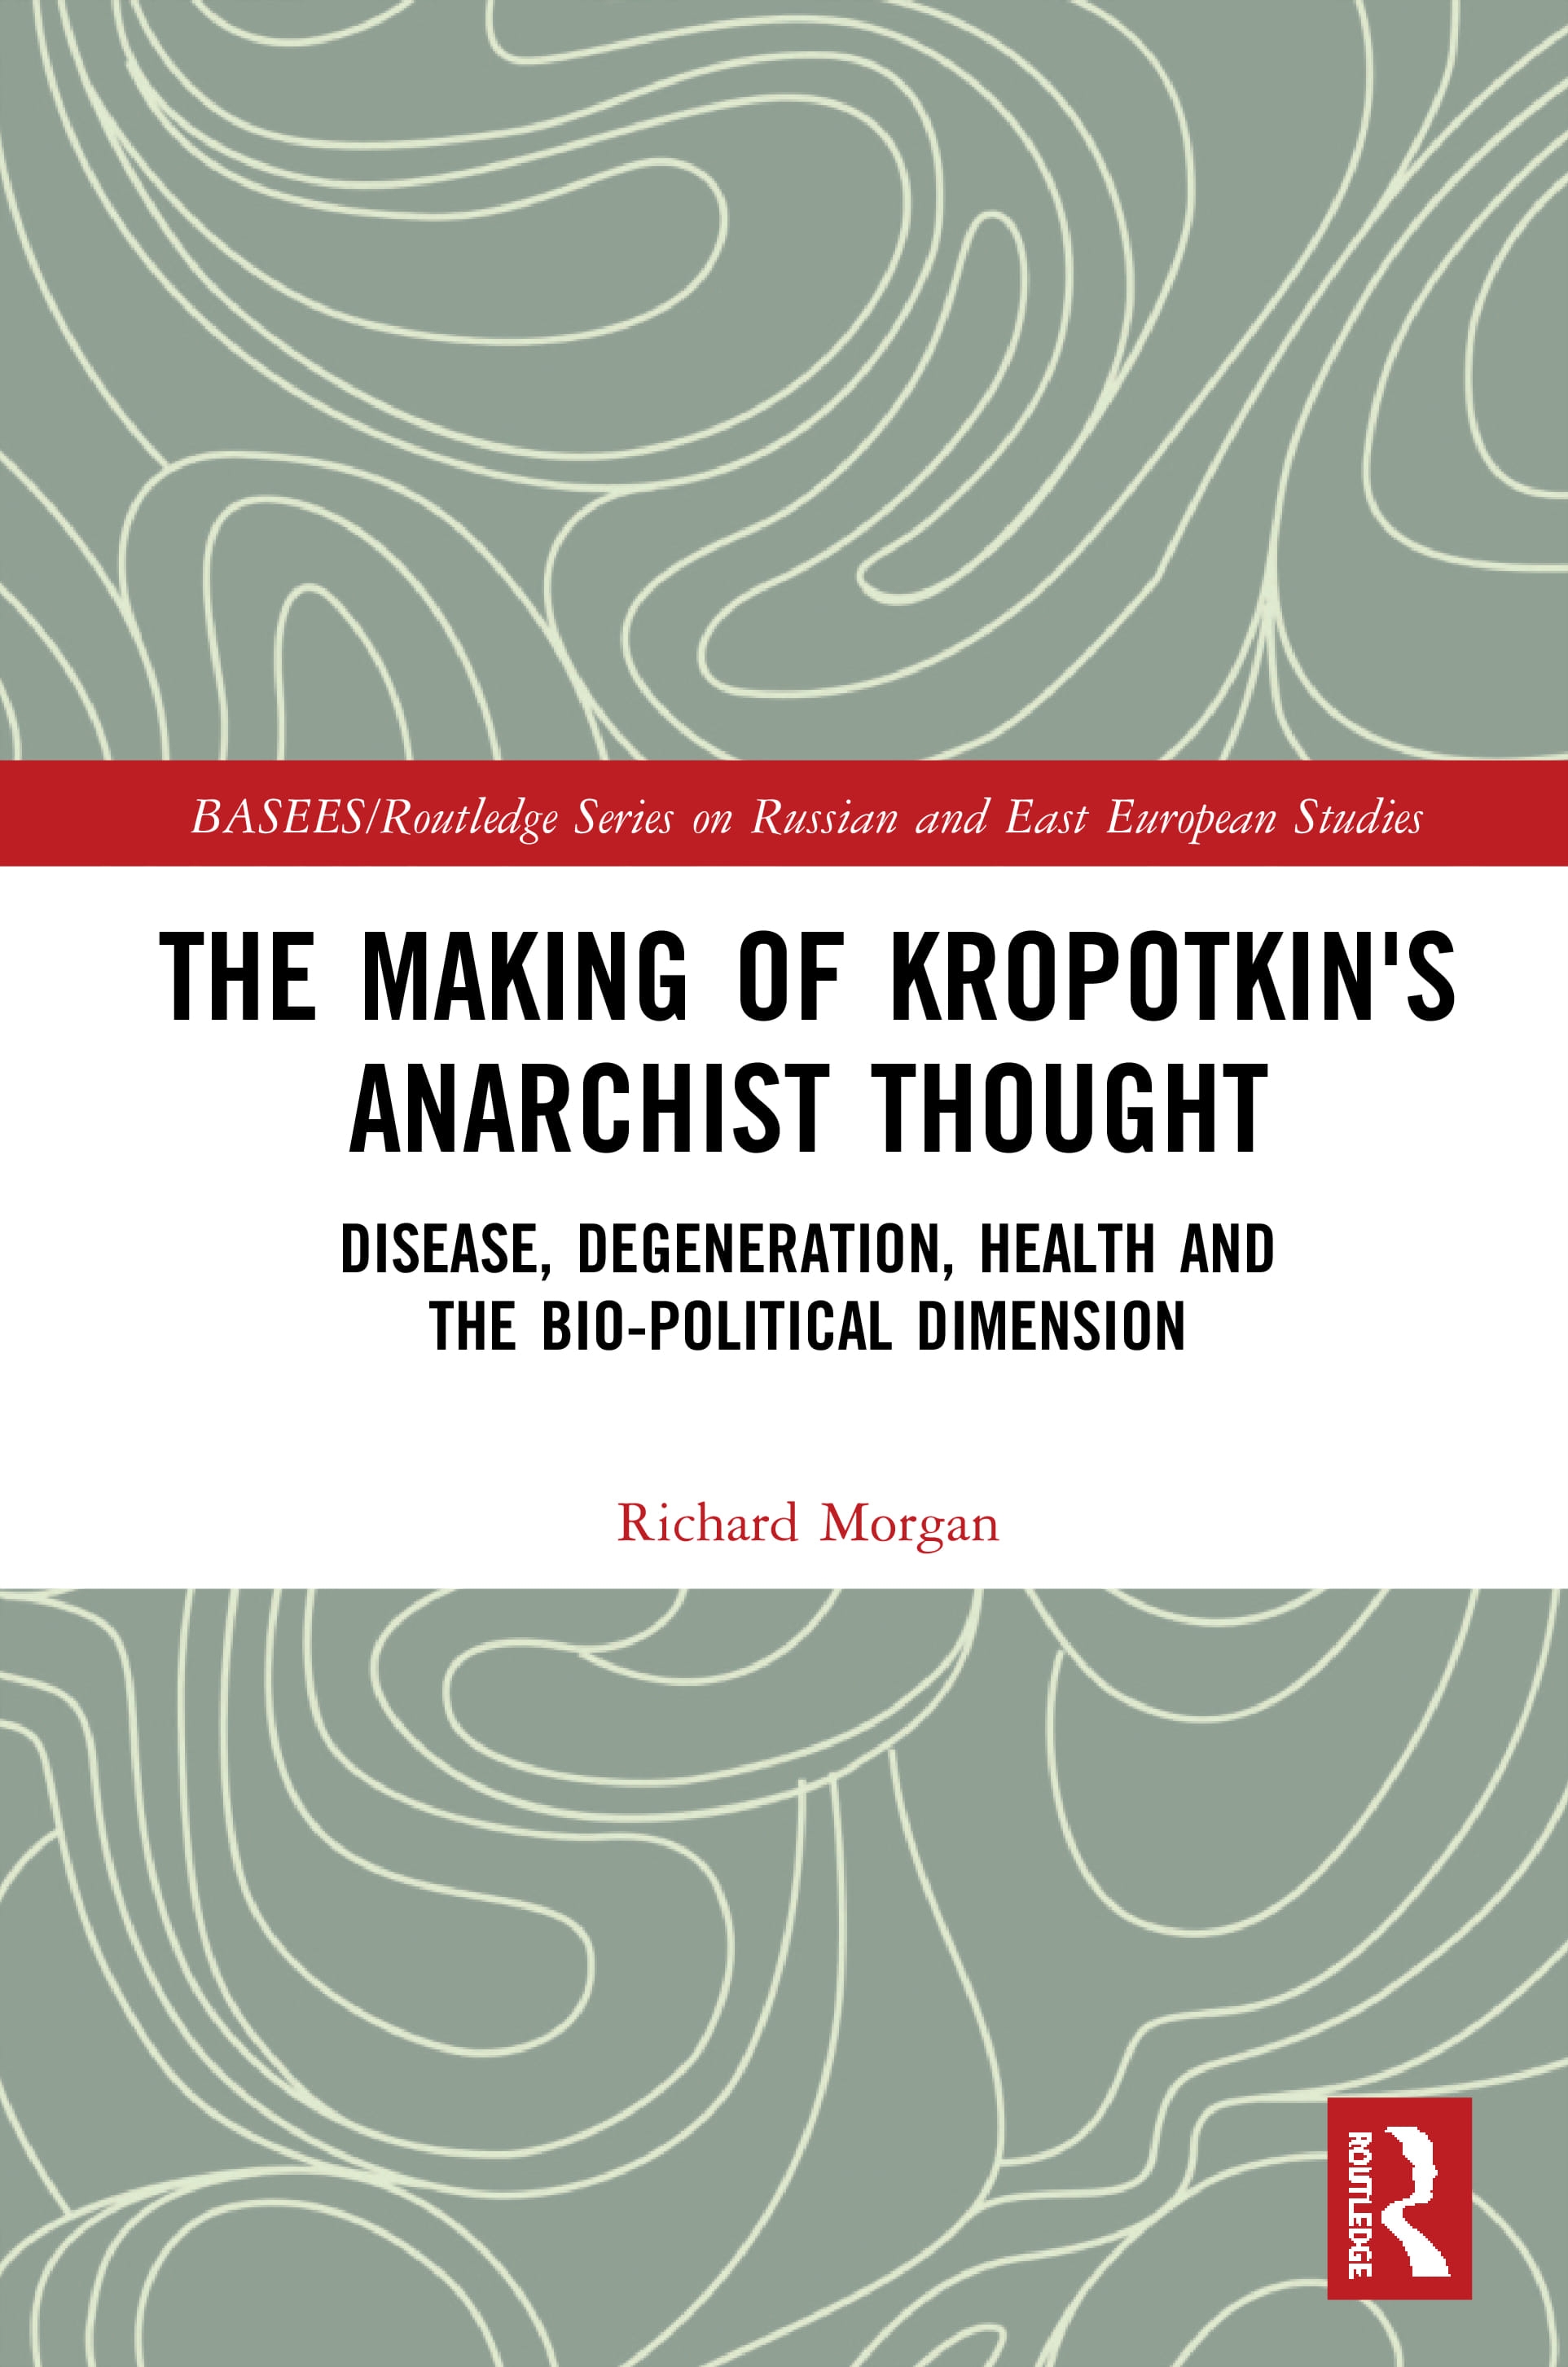 The Making or Kropotkin’’s Anarchist Thought: Disease, Degeneration, Health and the Bio-Political Dimension